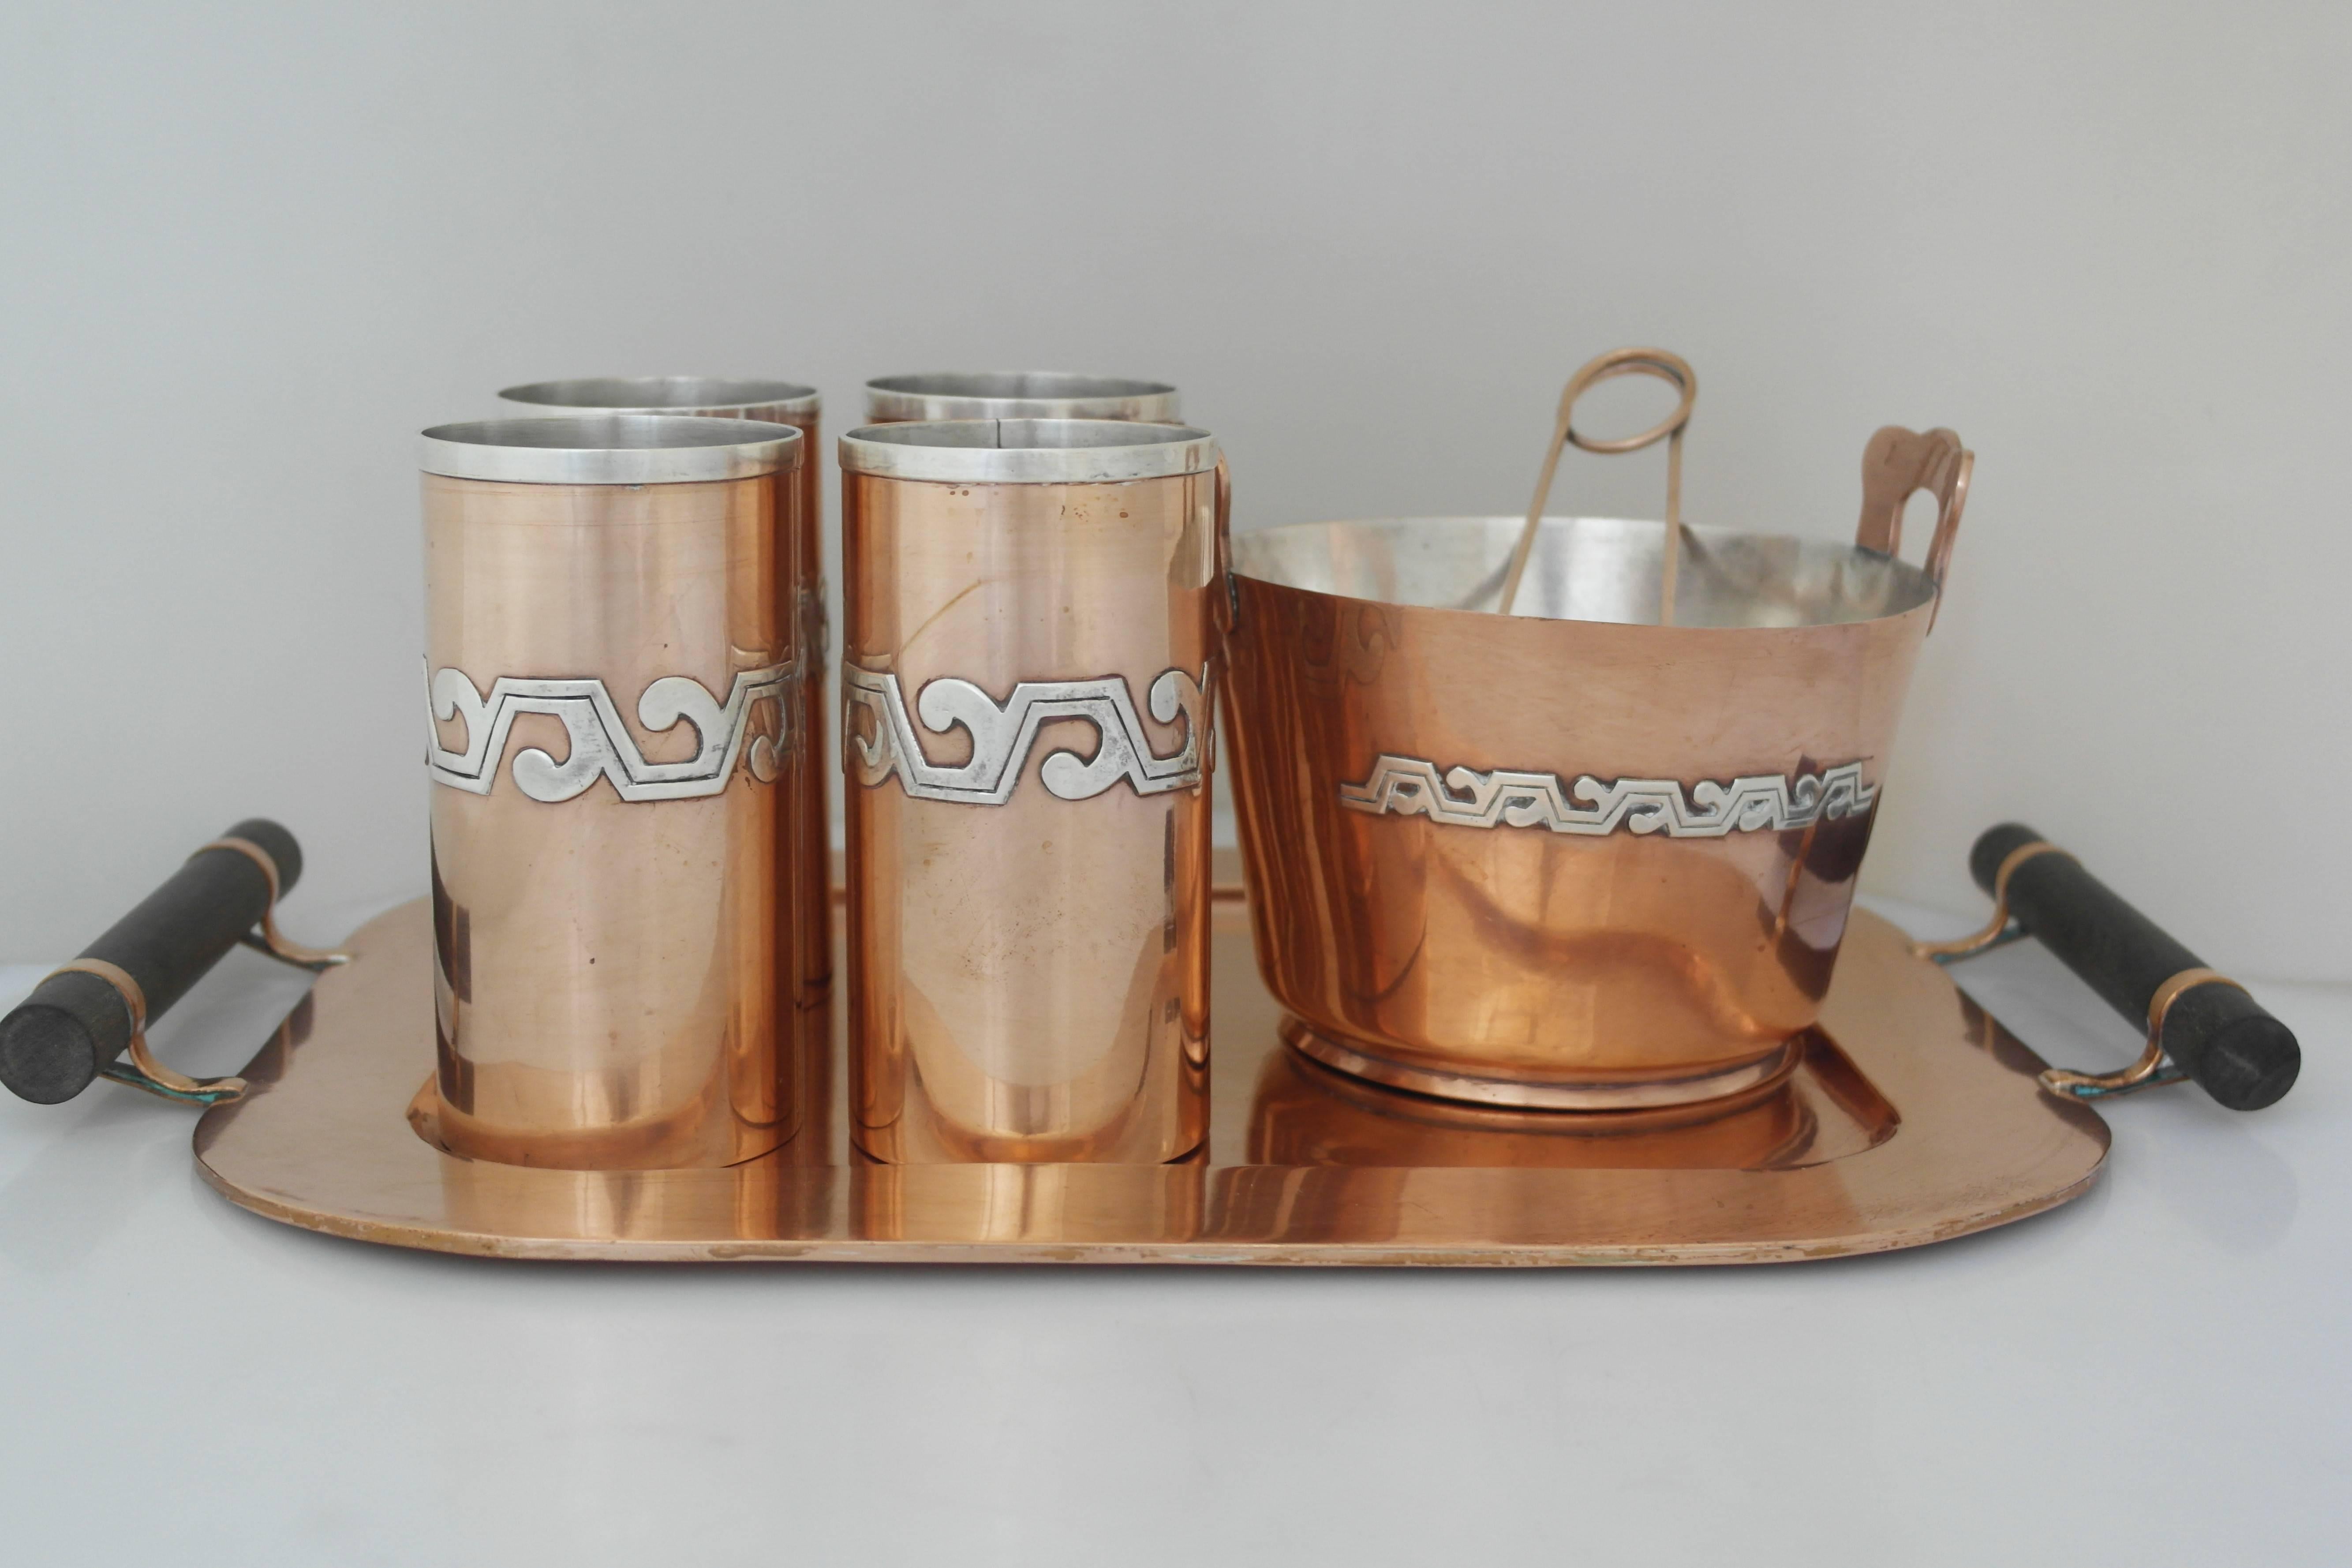 Being offered is a copper and sterling silver drink set by Victoria of Taxco, Mexico. Incredible set includes 4 tumblers, an ice bucket with tongs, and a matching tray with rosewood handle. Entire set is hand-wrought copper with applied sterling